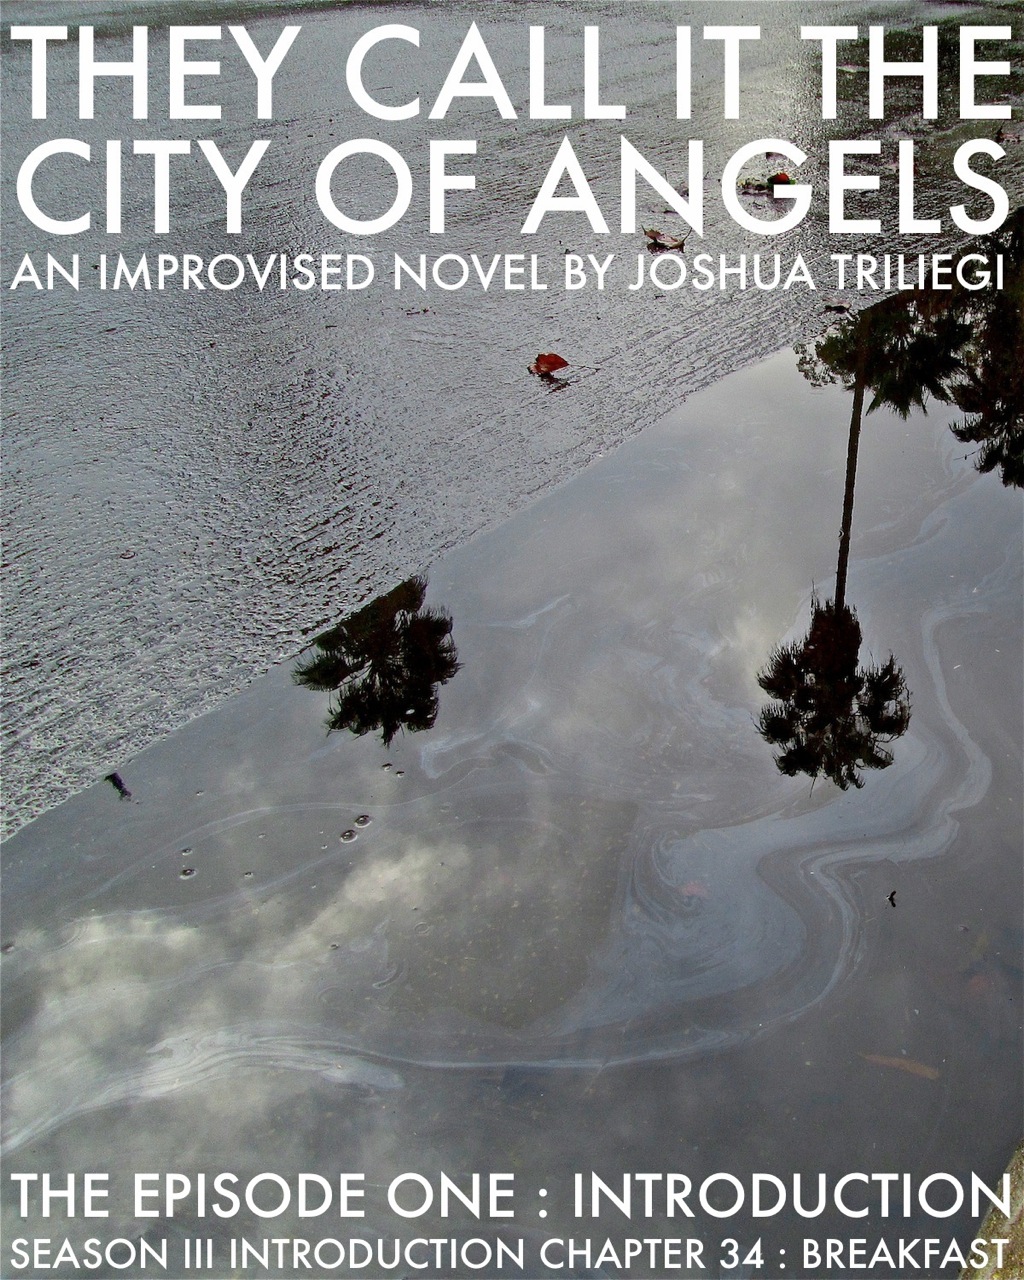 READ EPISODE ONE:"THEY CALL IT THE CITY OF ANGELS"  - A NOVEL